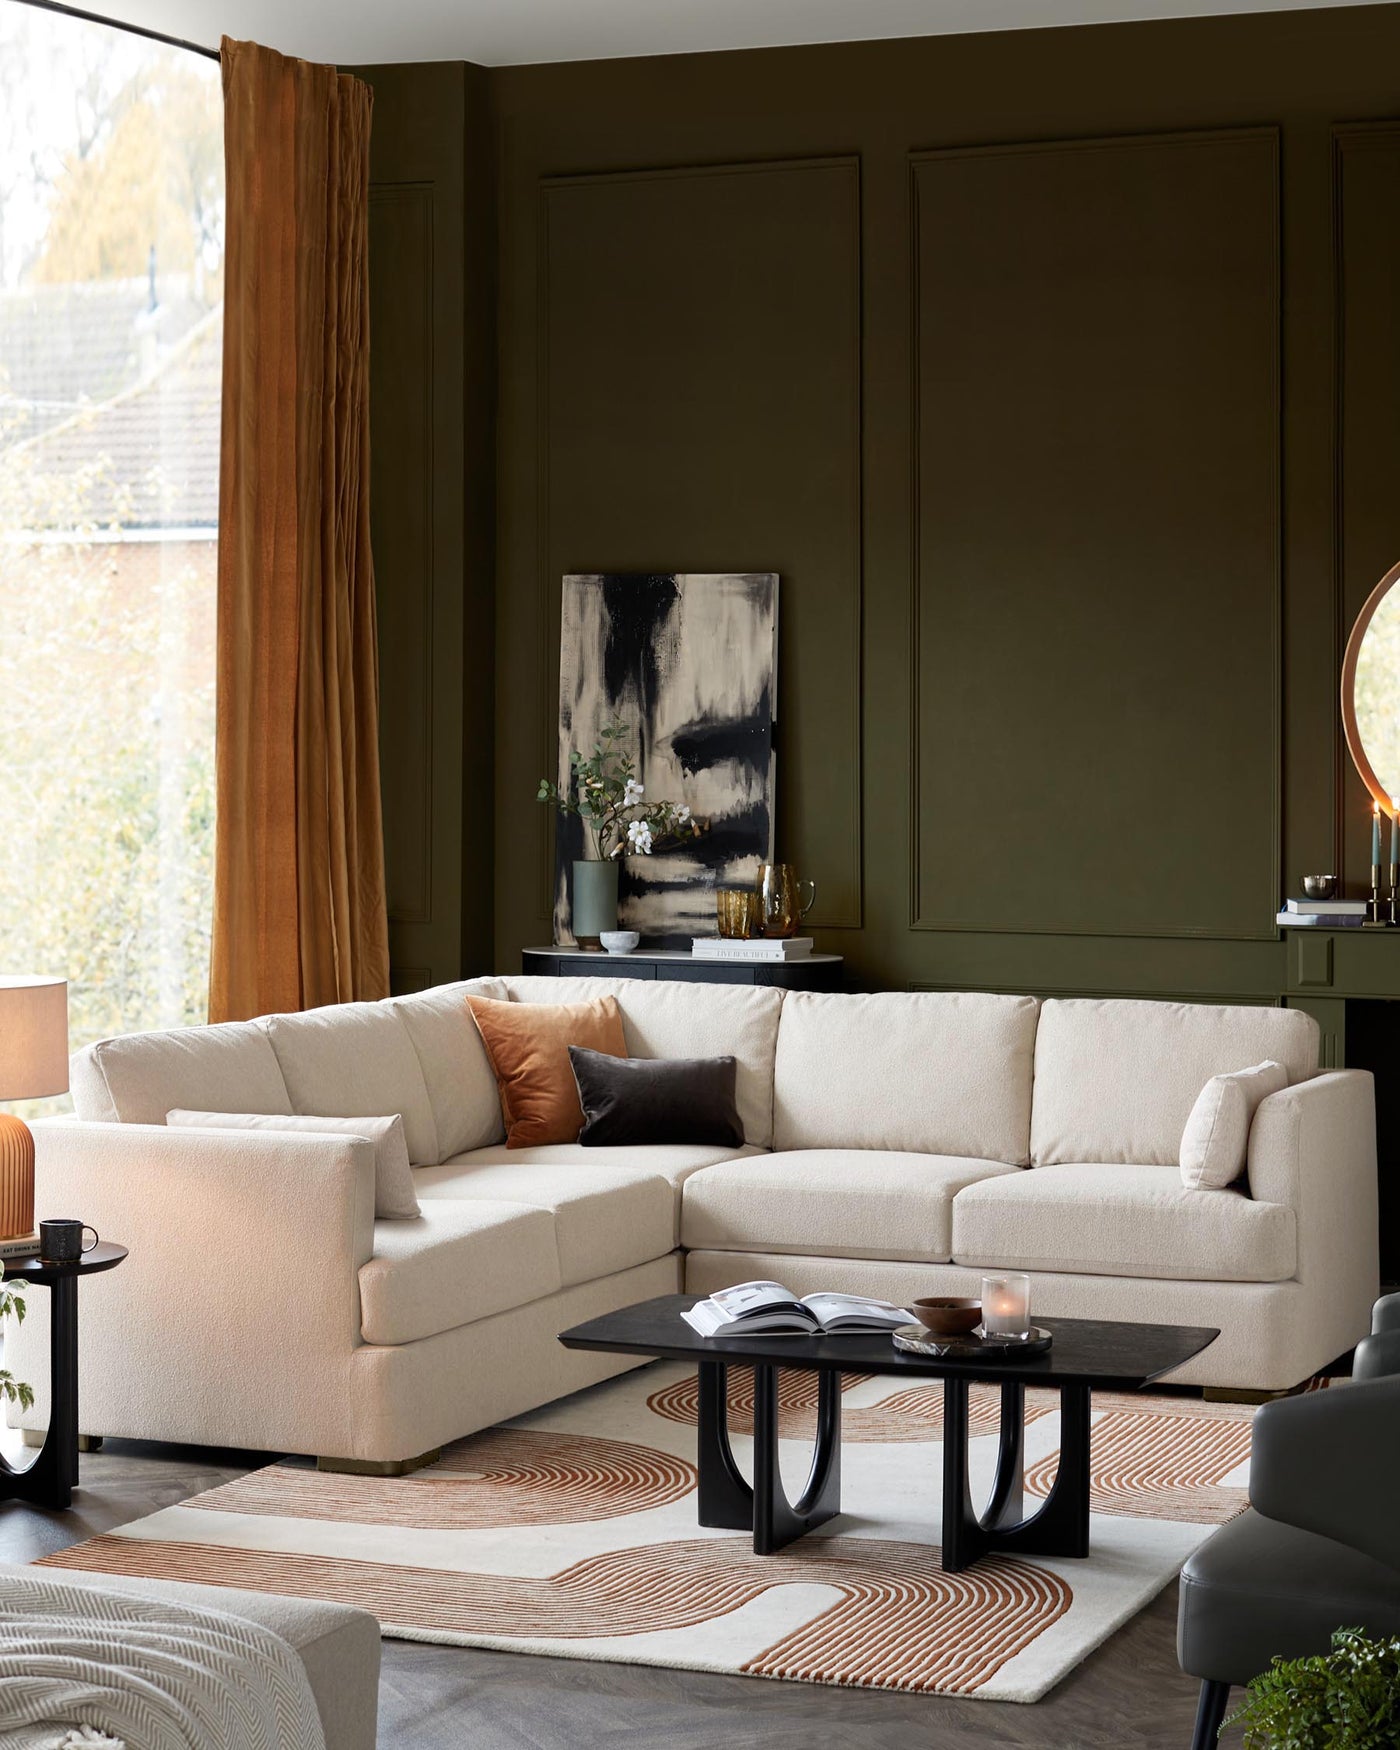 Modern living room setup featuring an L-shaped modular sofa in a light beige fabric with plush cushions, complemented by a set of two nesting coffee tables with black tops and unique curved-base design. A textured off-white and terracotta rug anchors the space.